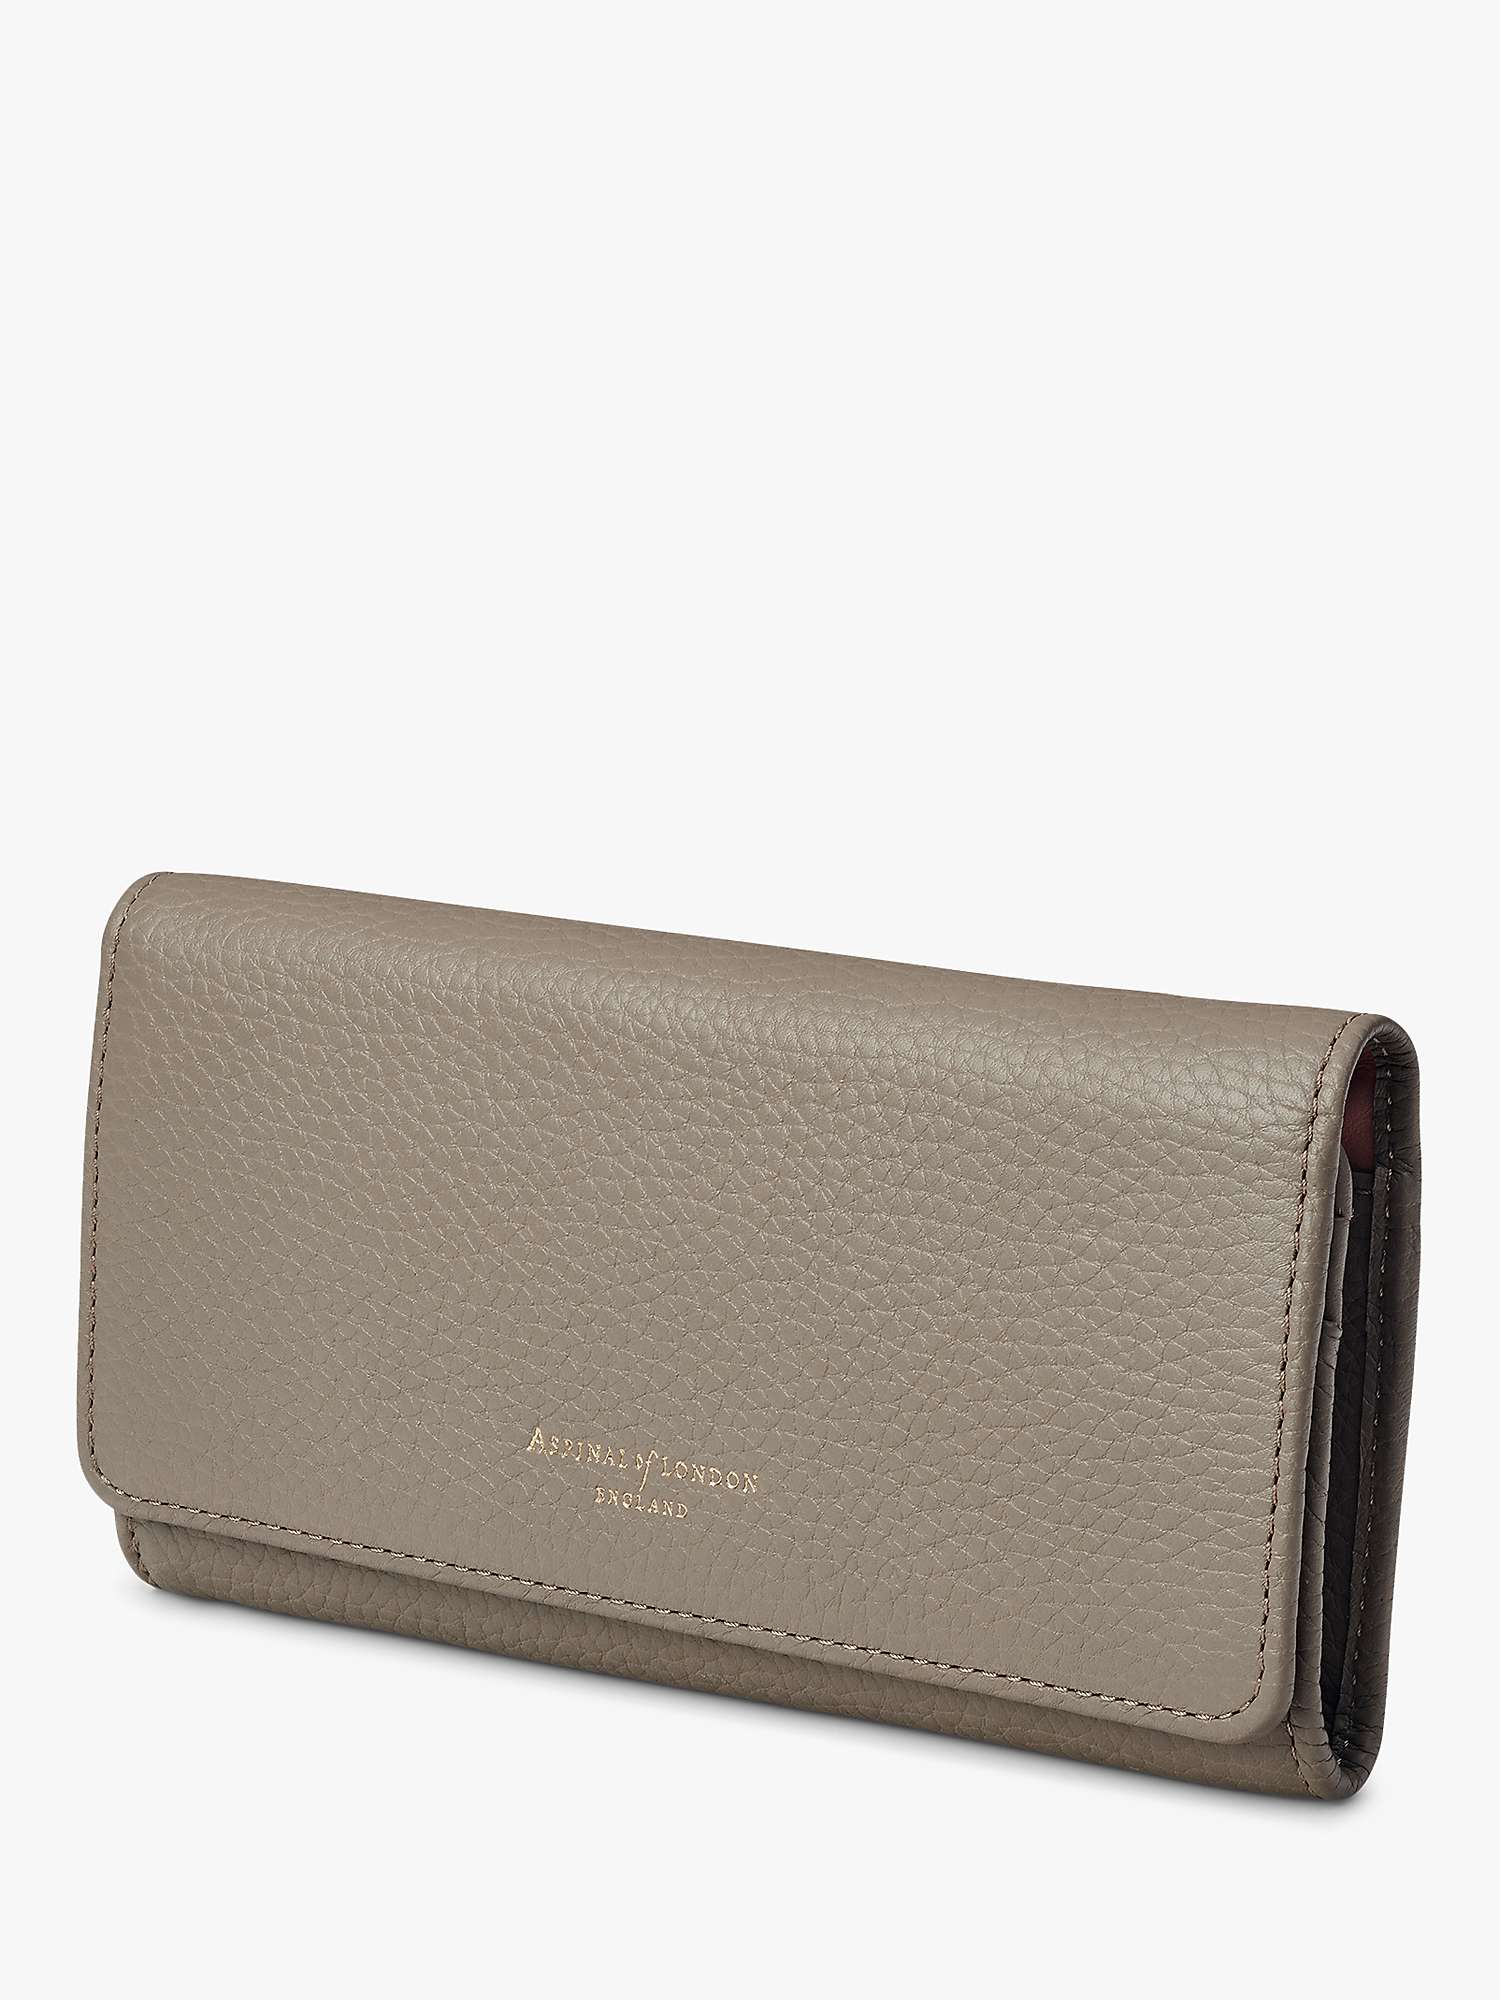 Buy Aspinal of London Lottie Pebble Leather Purse Online at johnlewis.com